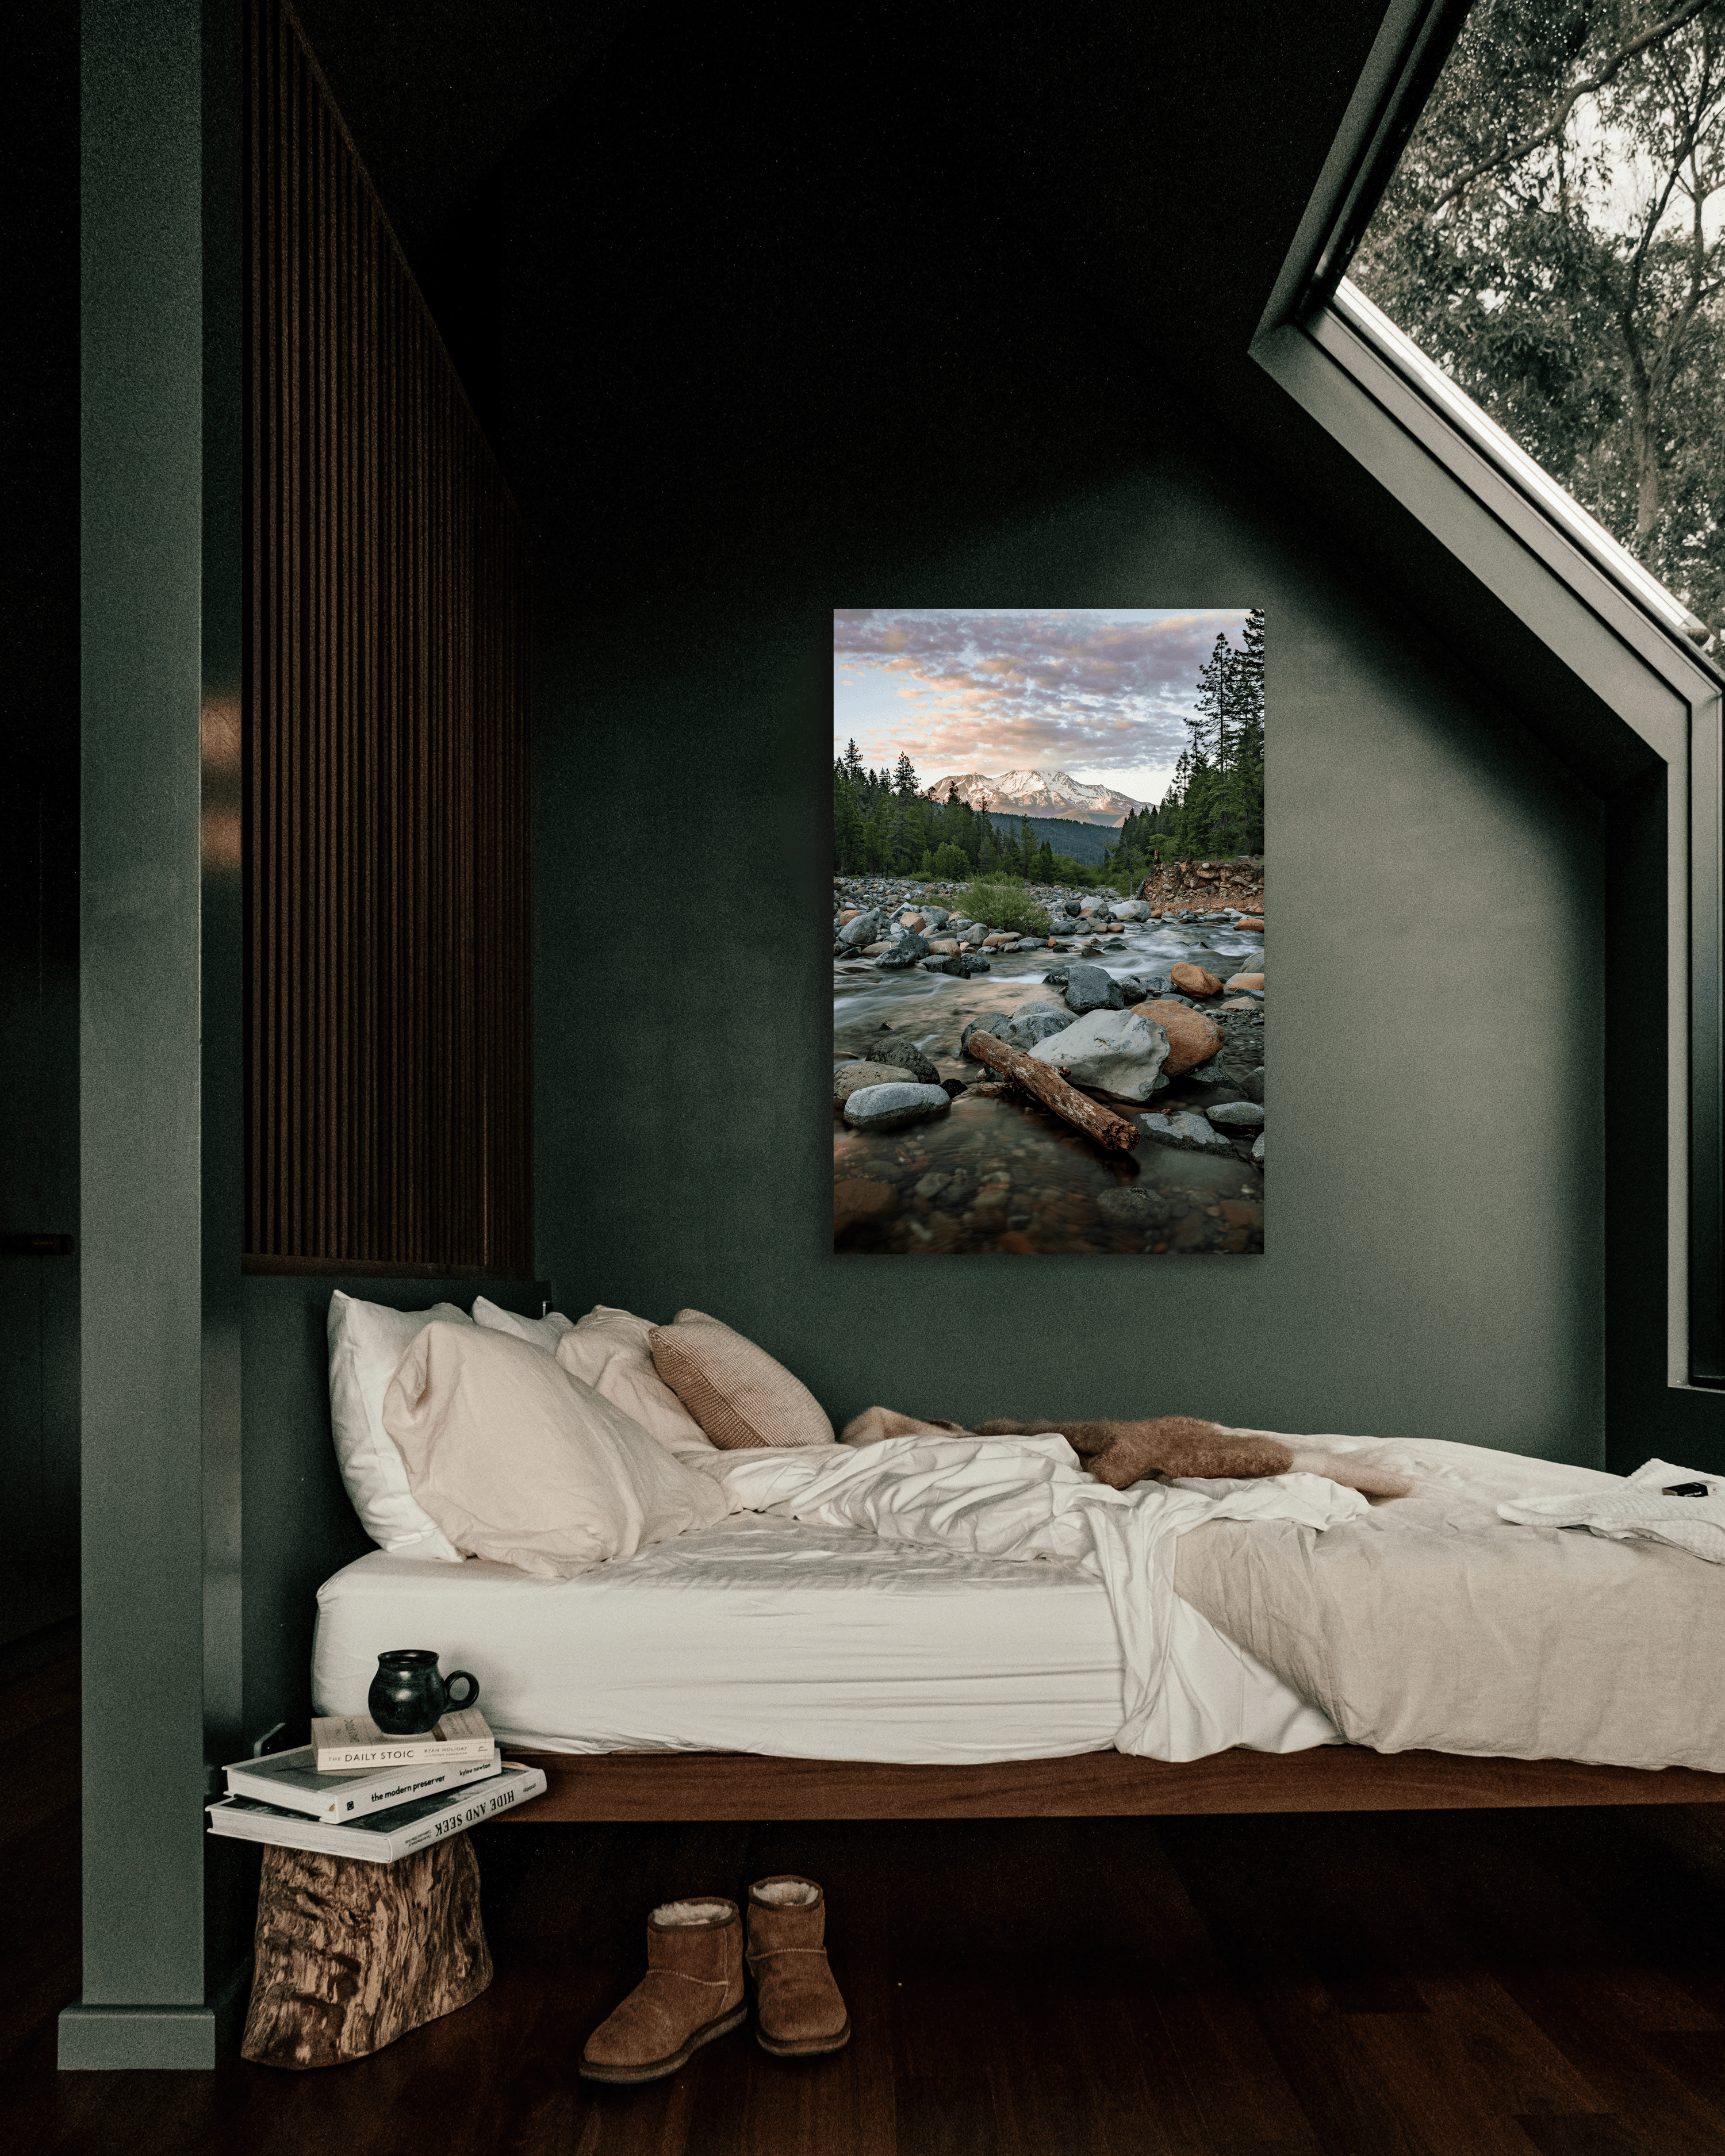 A bedroom wall decorated with a fine art photograph showcasing a mountain and mountain spring.